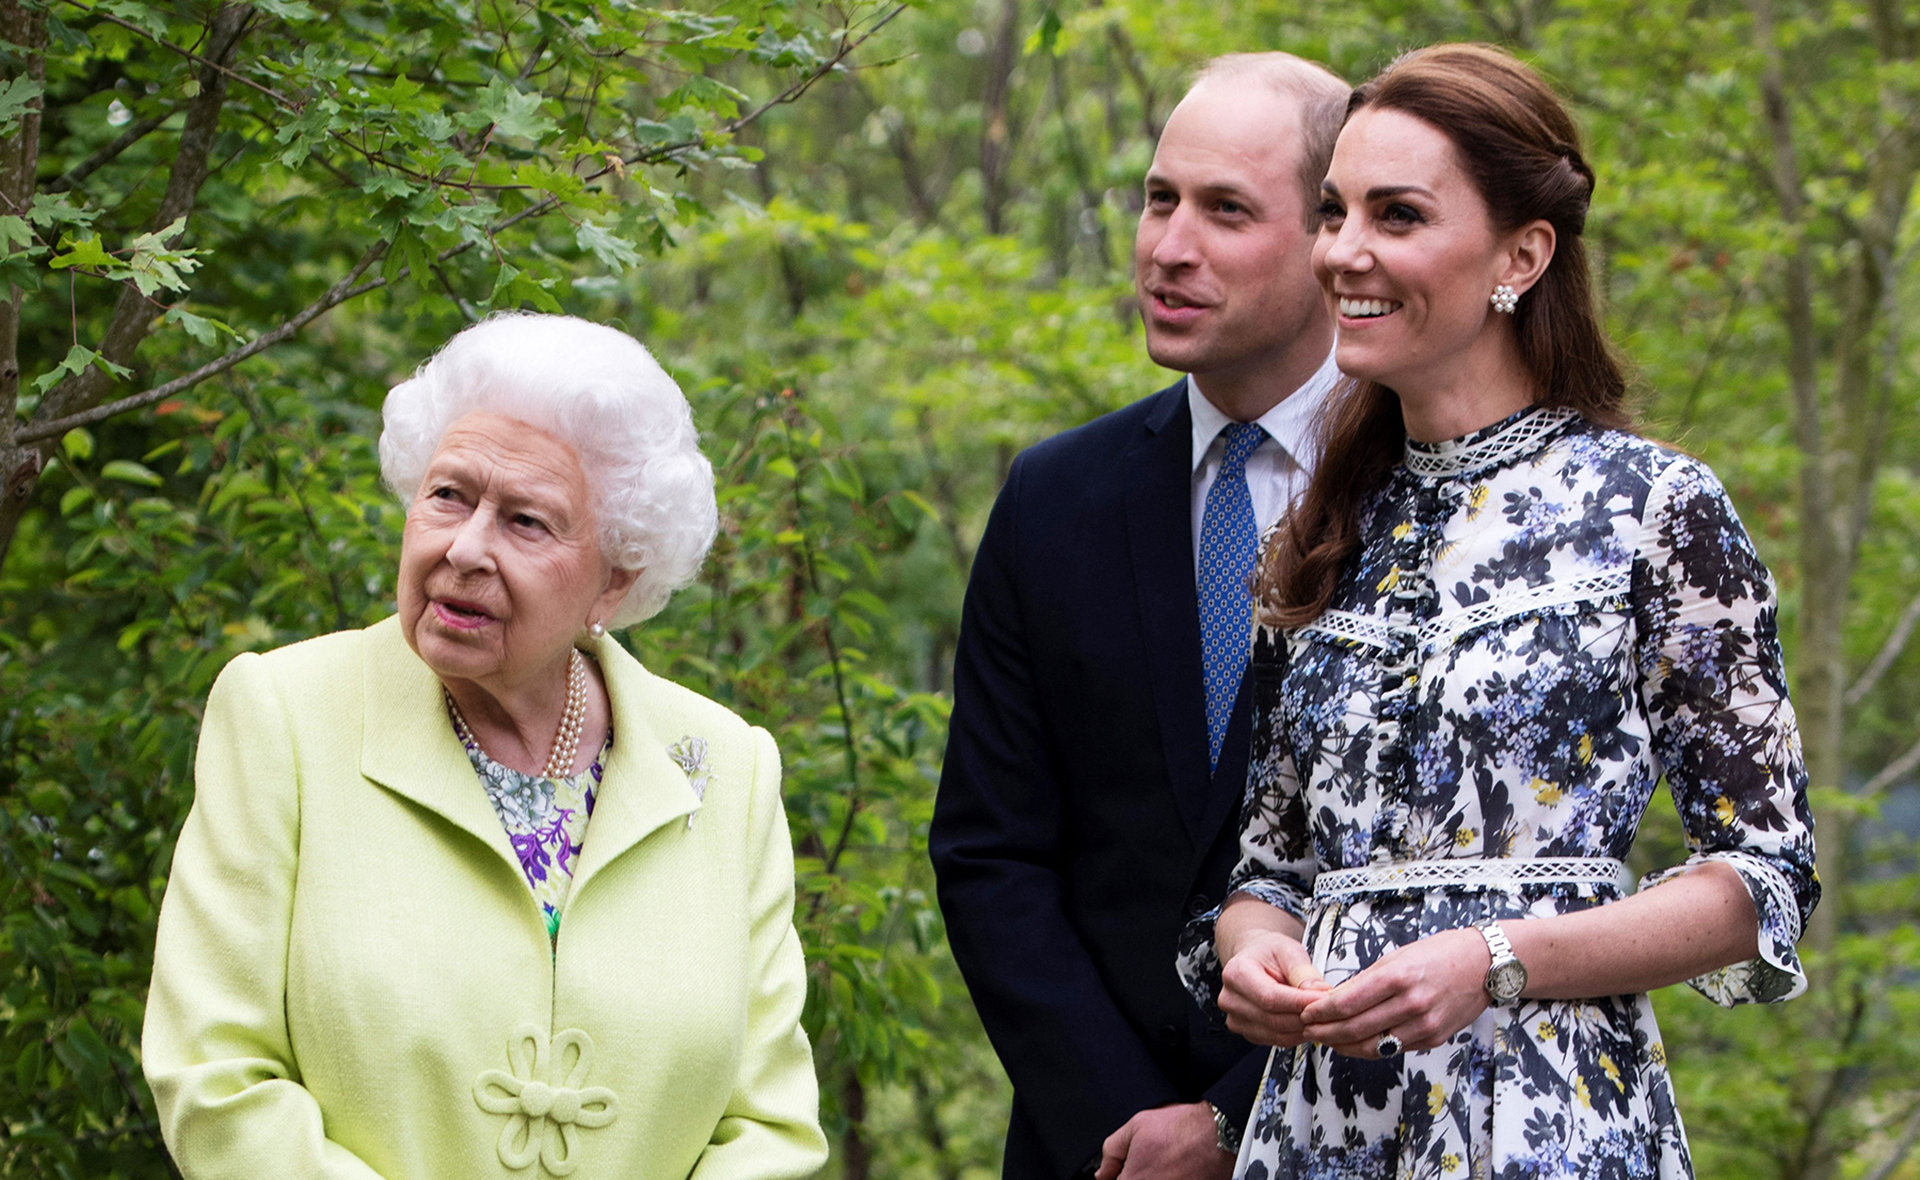 EXCLUSIVE: The Queen calls Prince William and Kate Middleton to an emergency palace summit